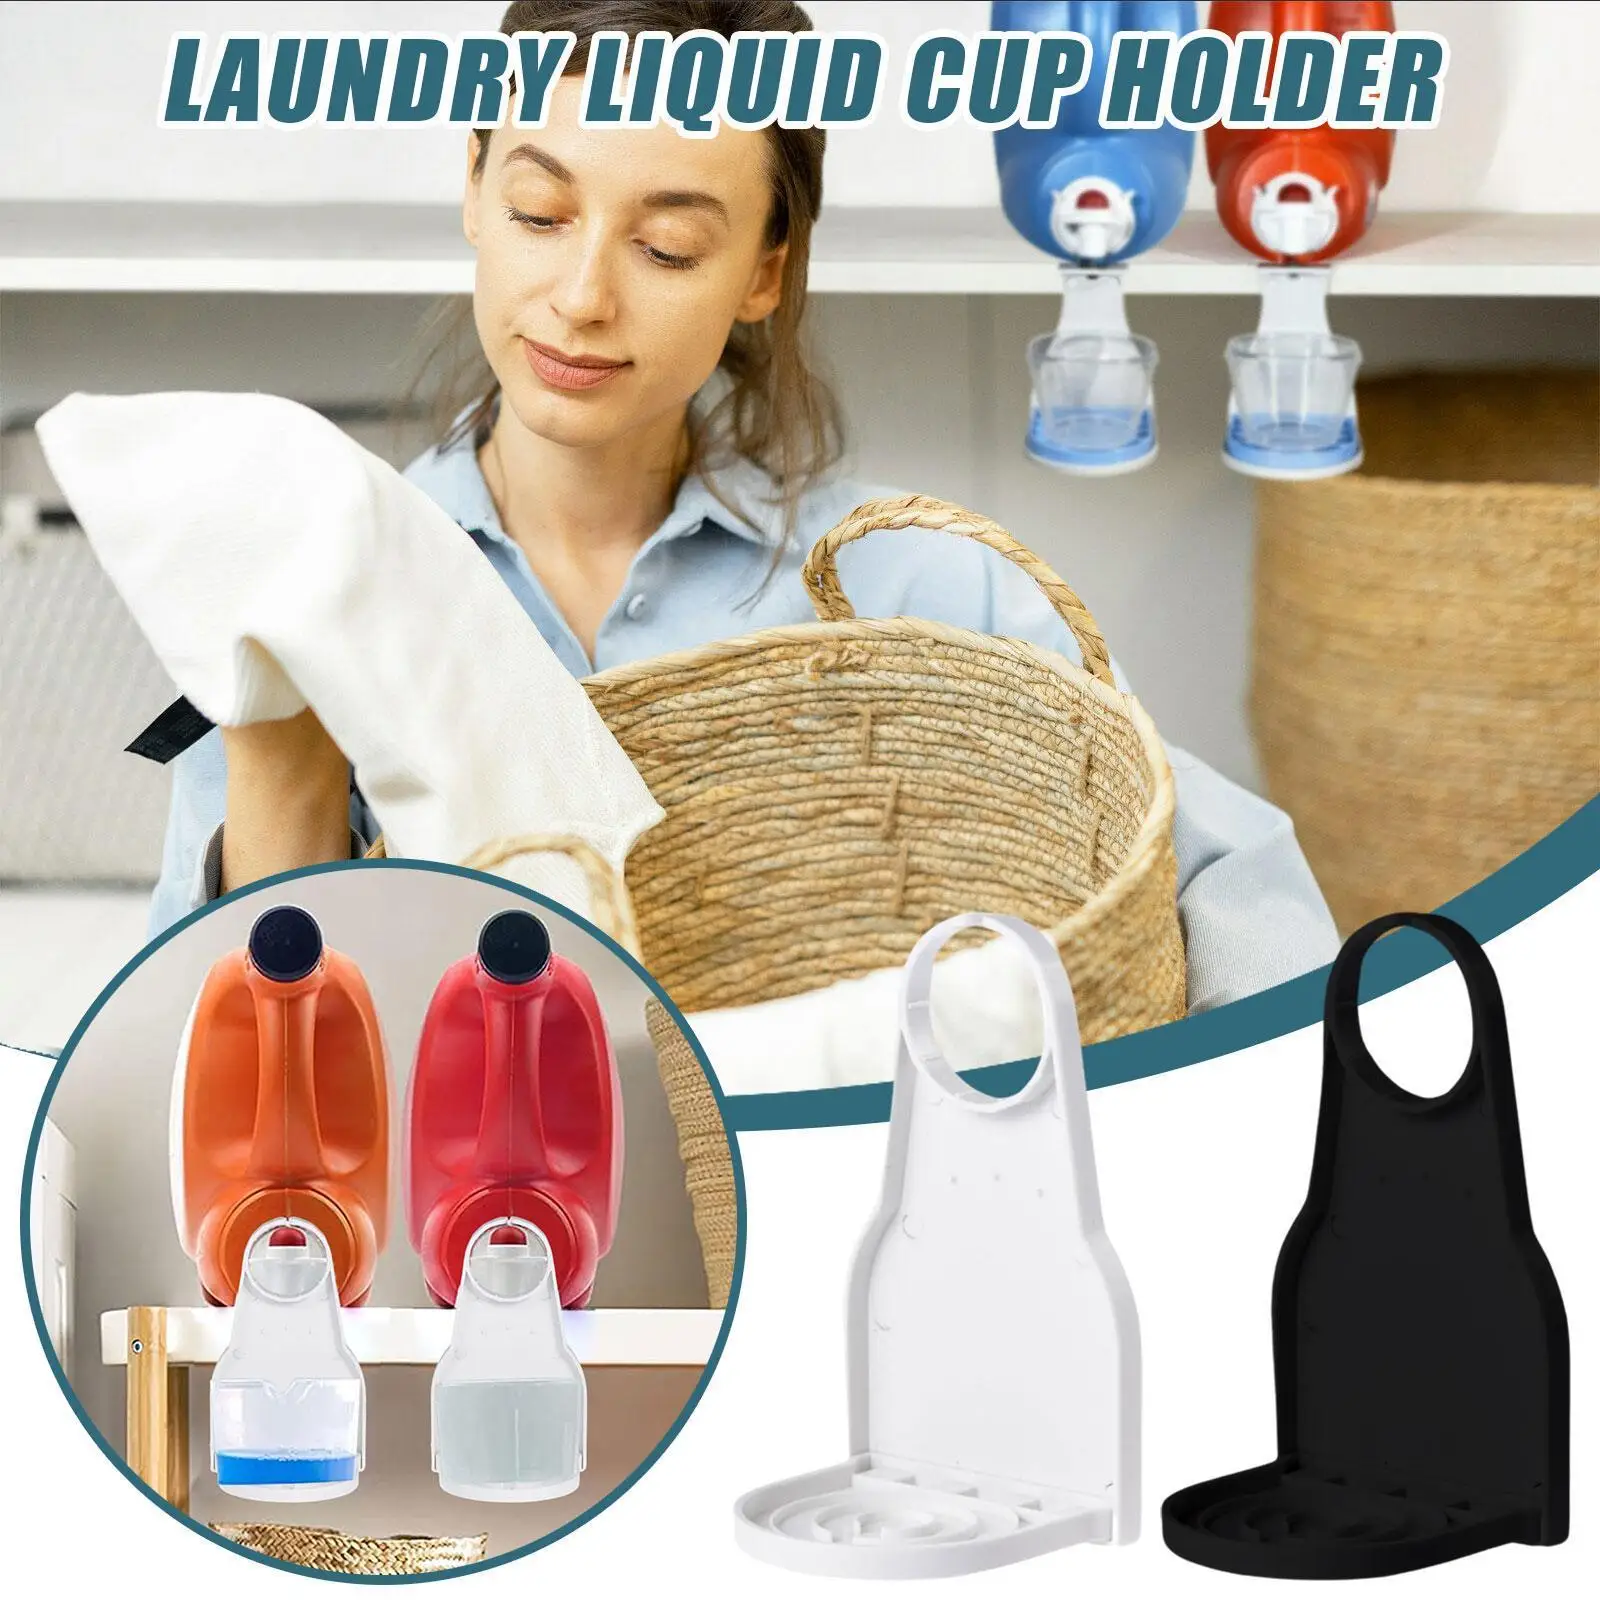 

Laundry Detergent Drip Catcher to Prevent Mess Detergent Slides Under Soap Tub Cup Bath Organizers Station Laundry Holder F3N3